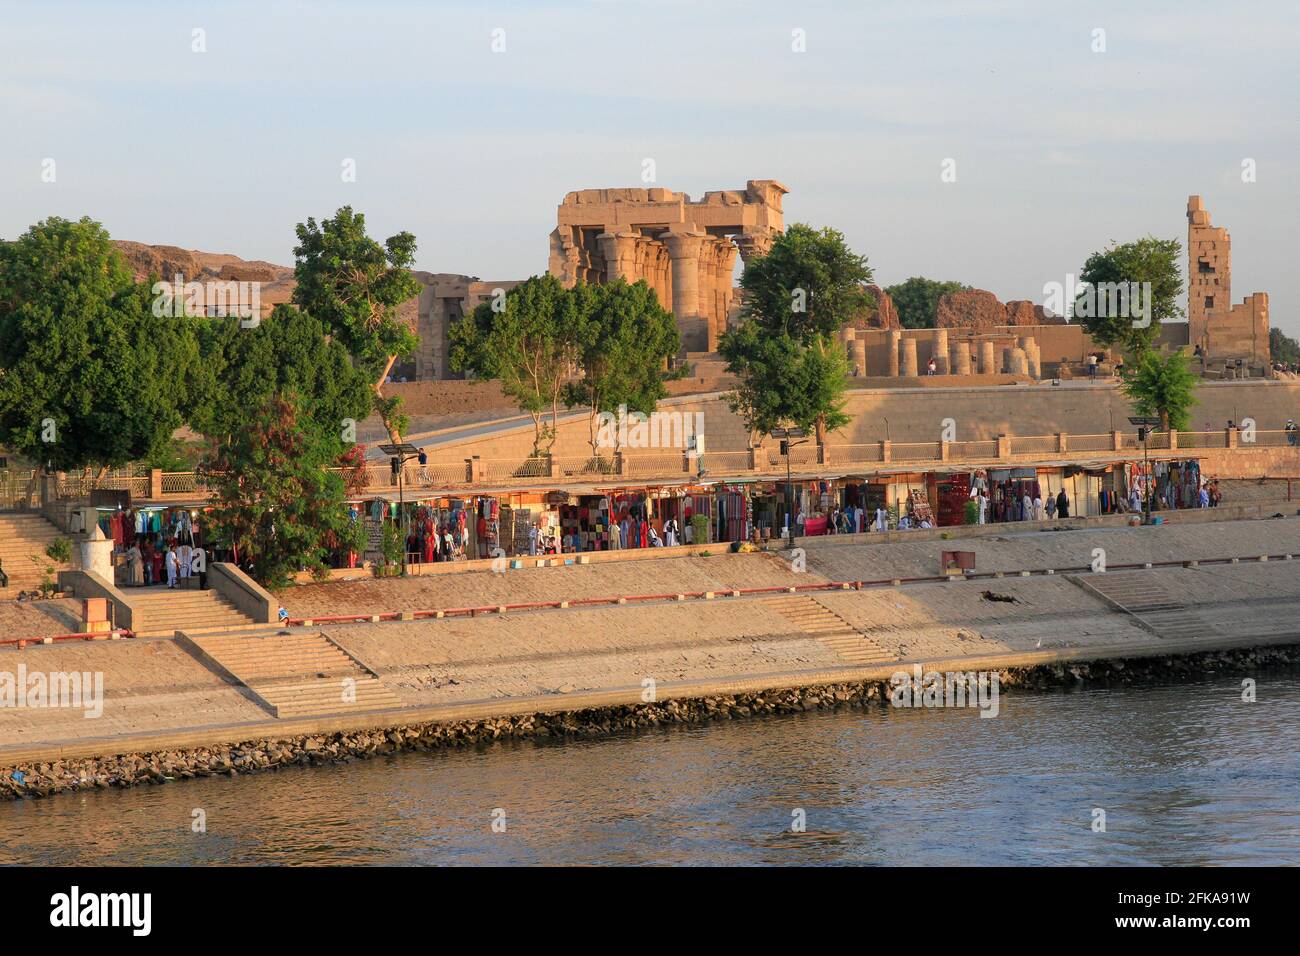 Temple of Kom Ombo from Nile River with riverside market place, Kom Ombo, Aswan, Egypt Stock Photo